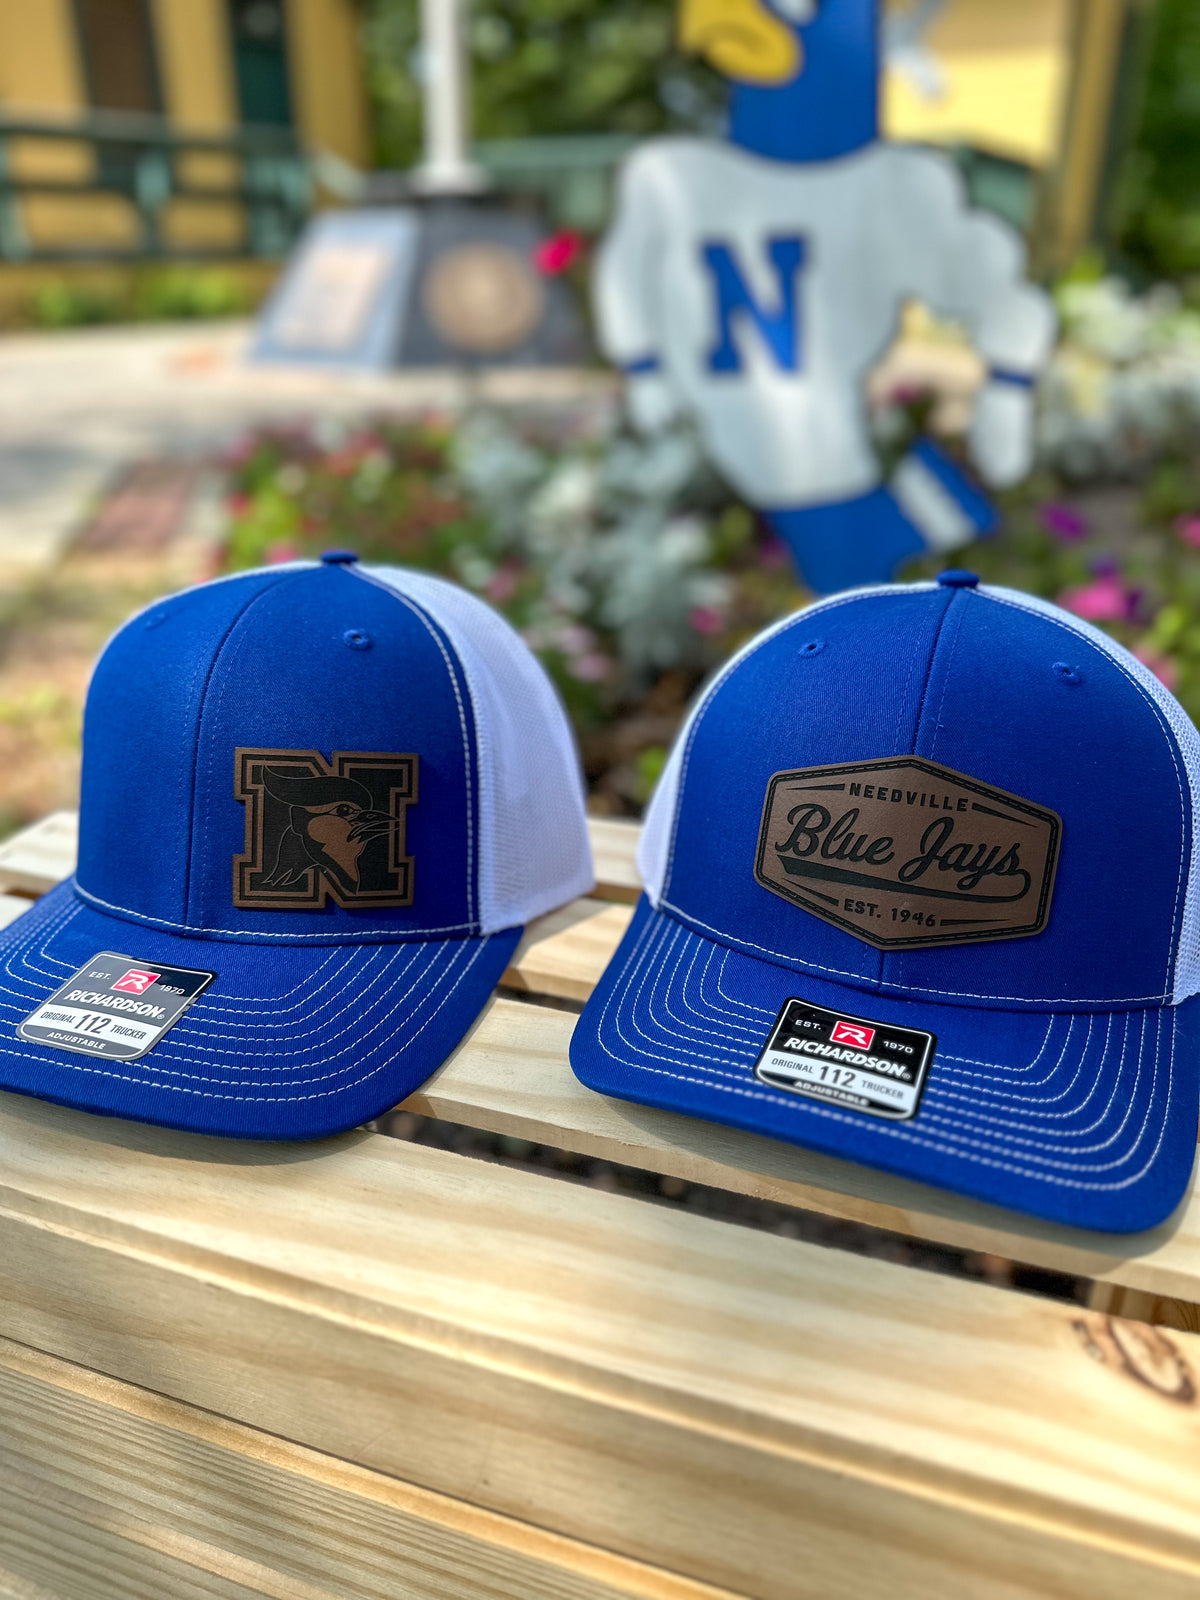 needville youth N blue and white hat